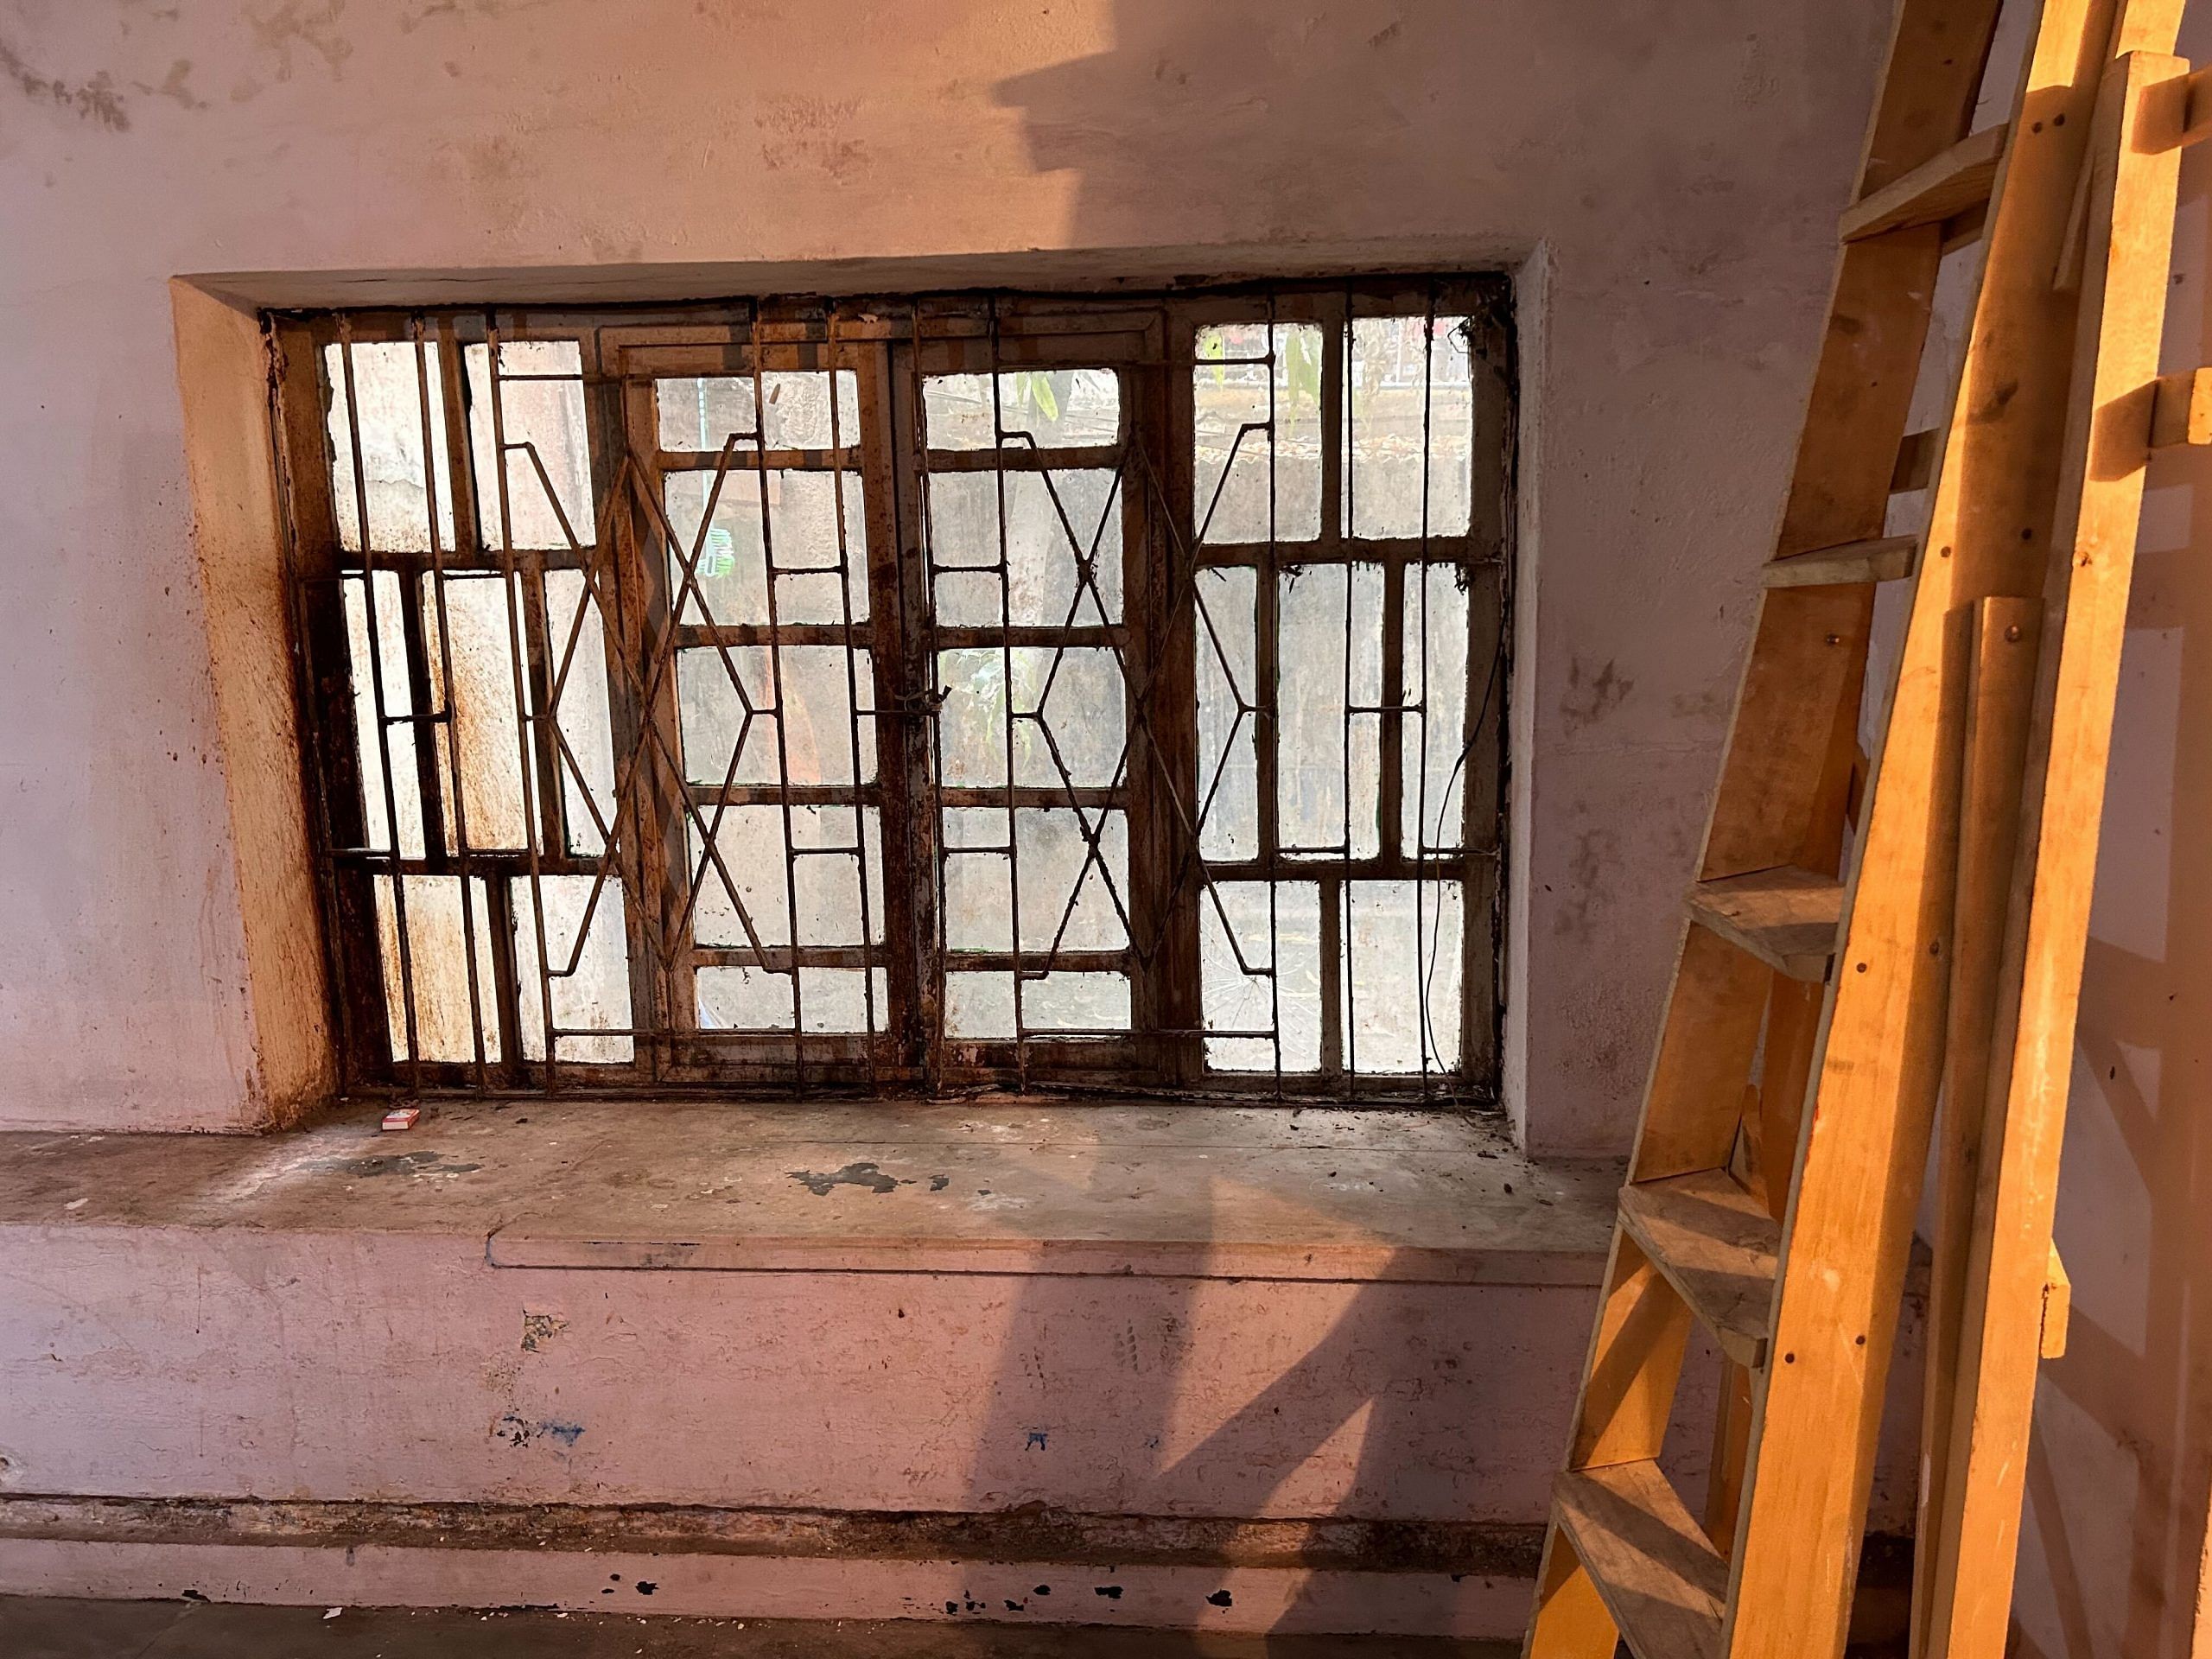 The windows were low and usually had a ledge where Jamini Roy would sit and paint | Sreyashi Dey